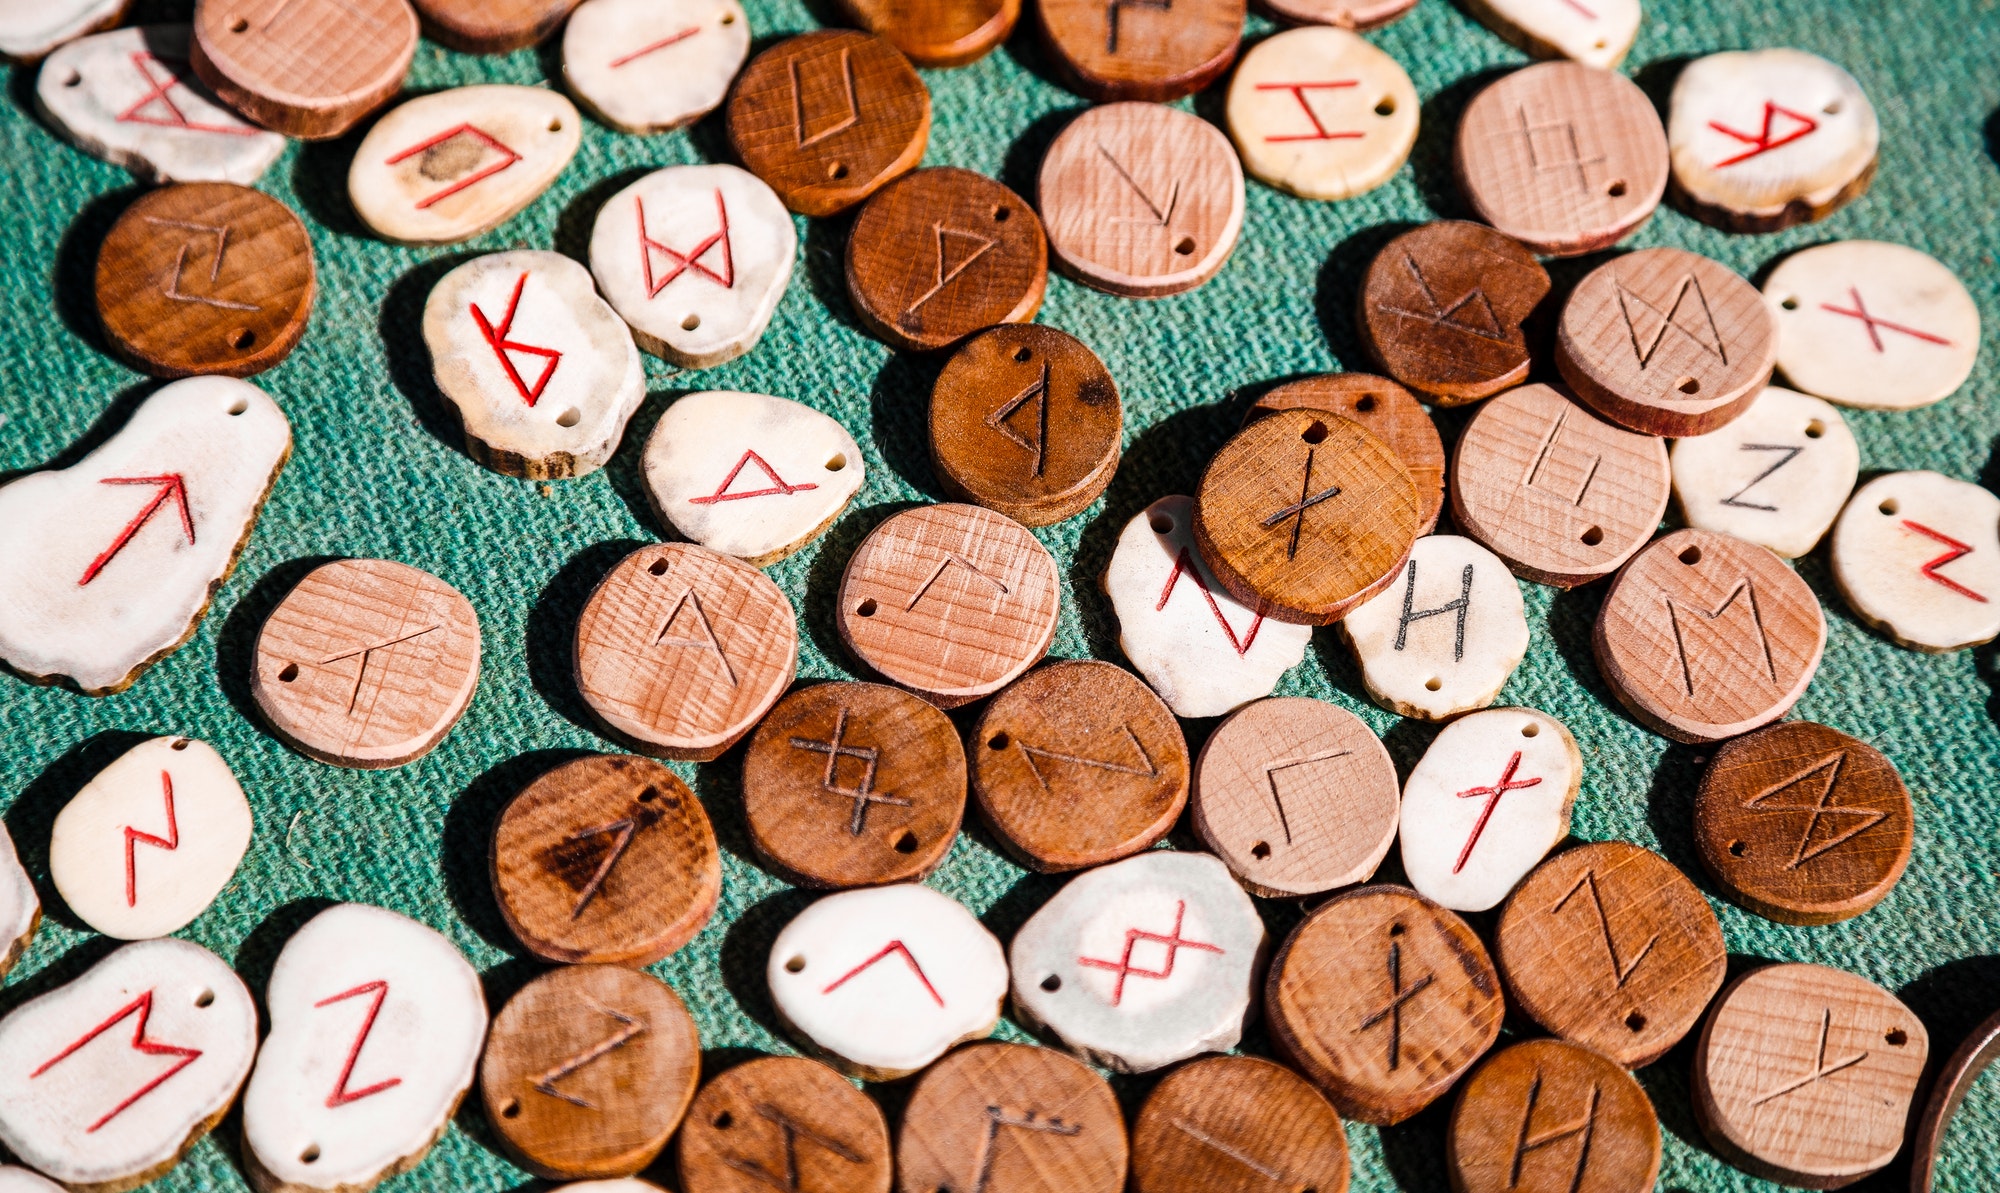 Wooden runes on a green background